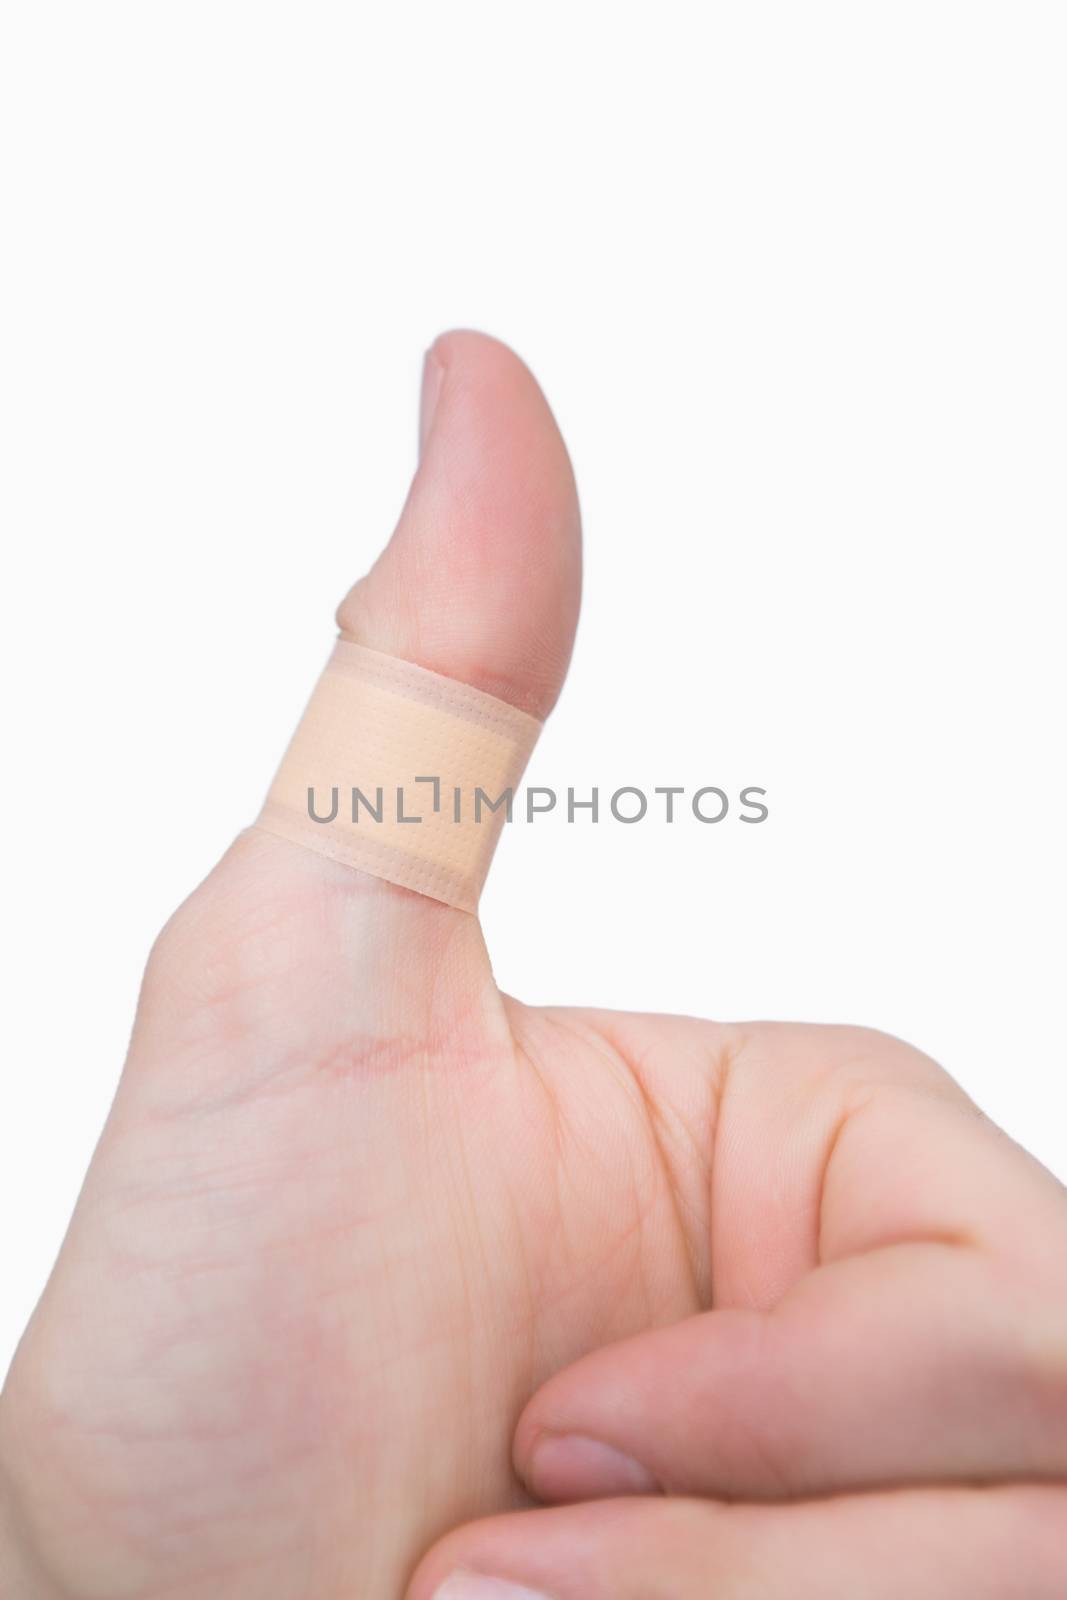 Closeup of thumbs up sign over white background